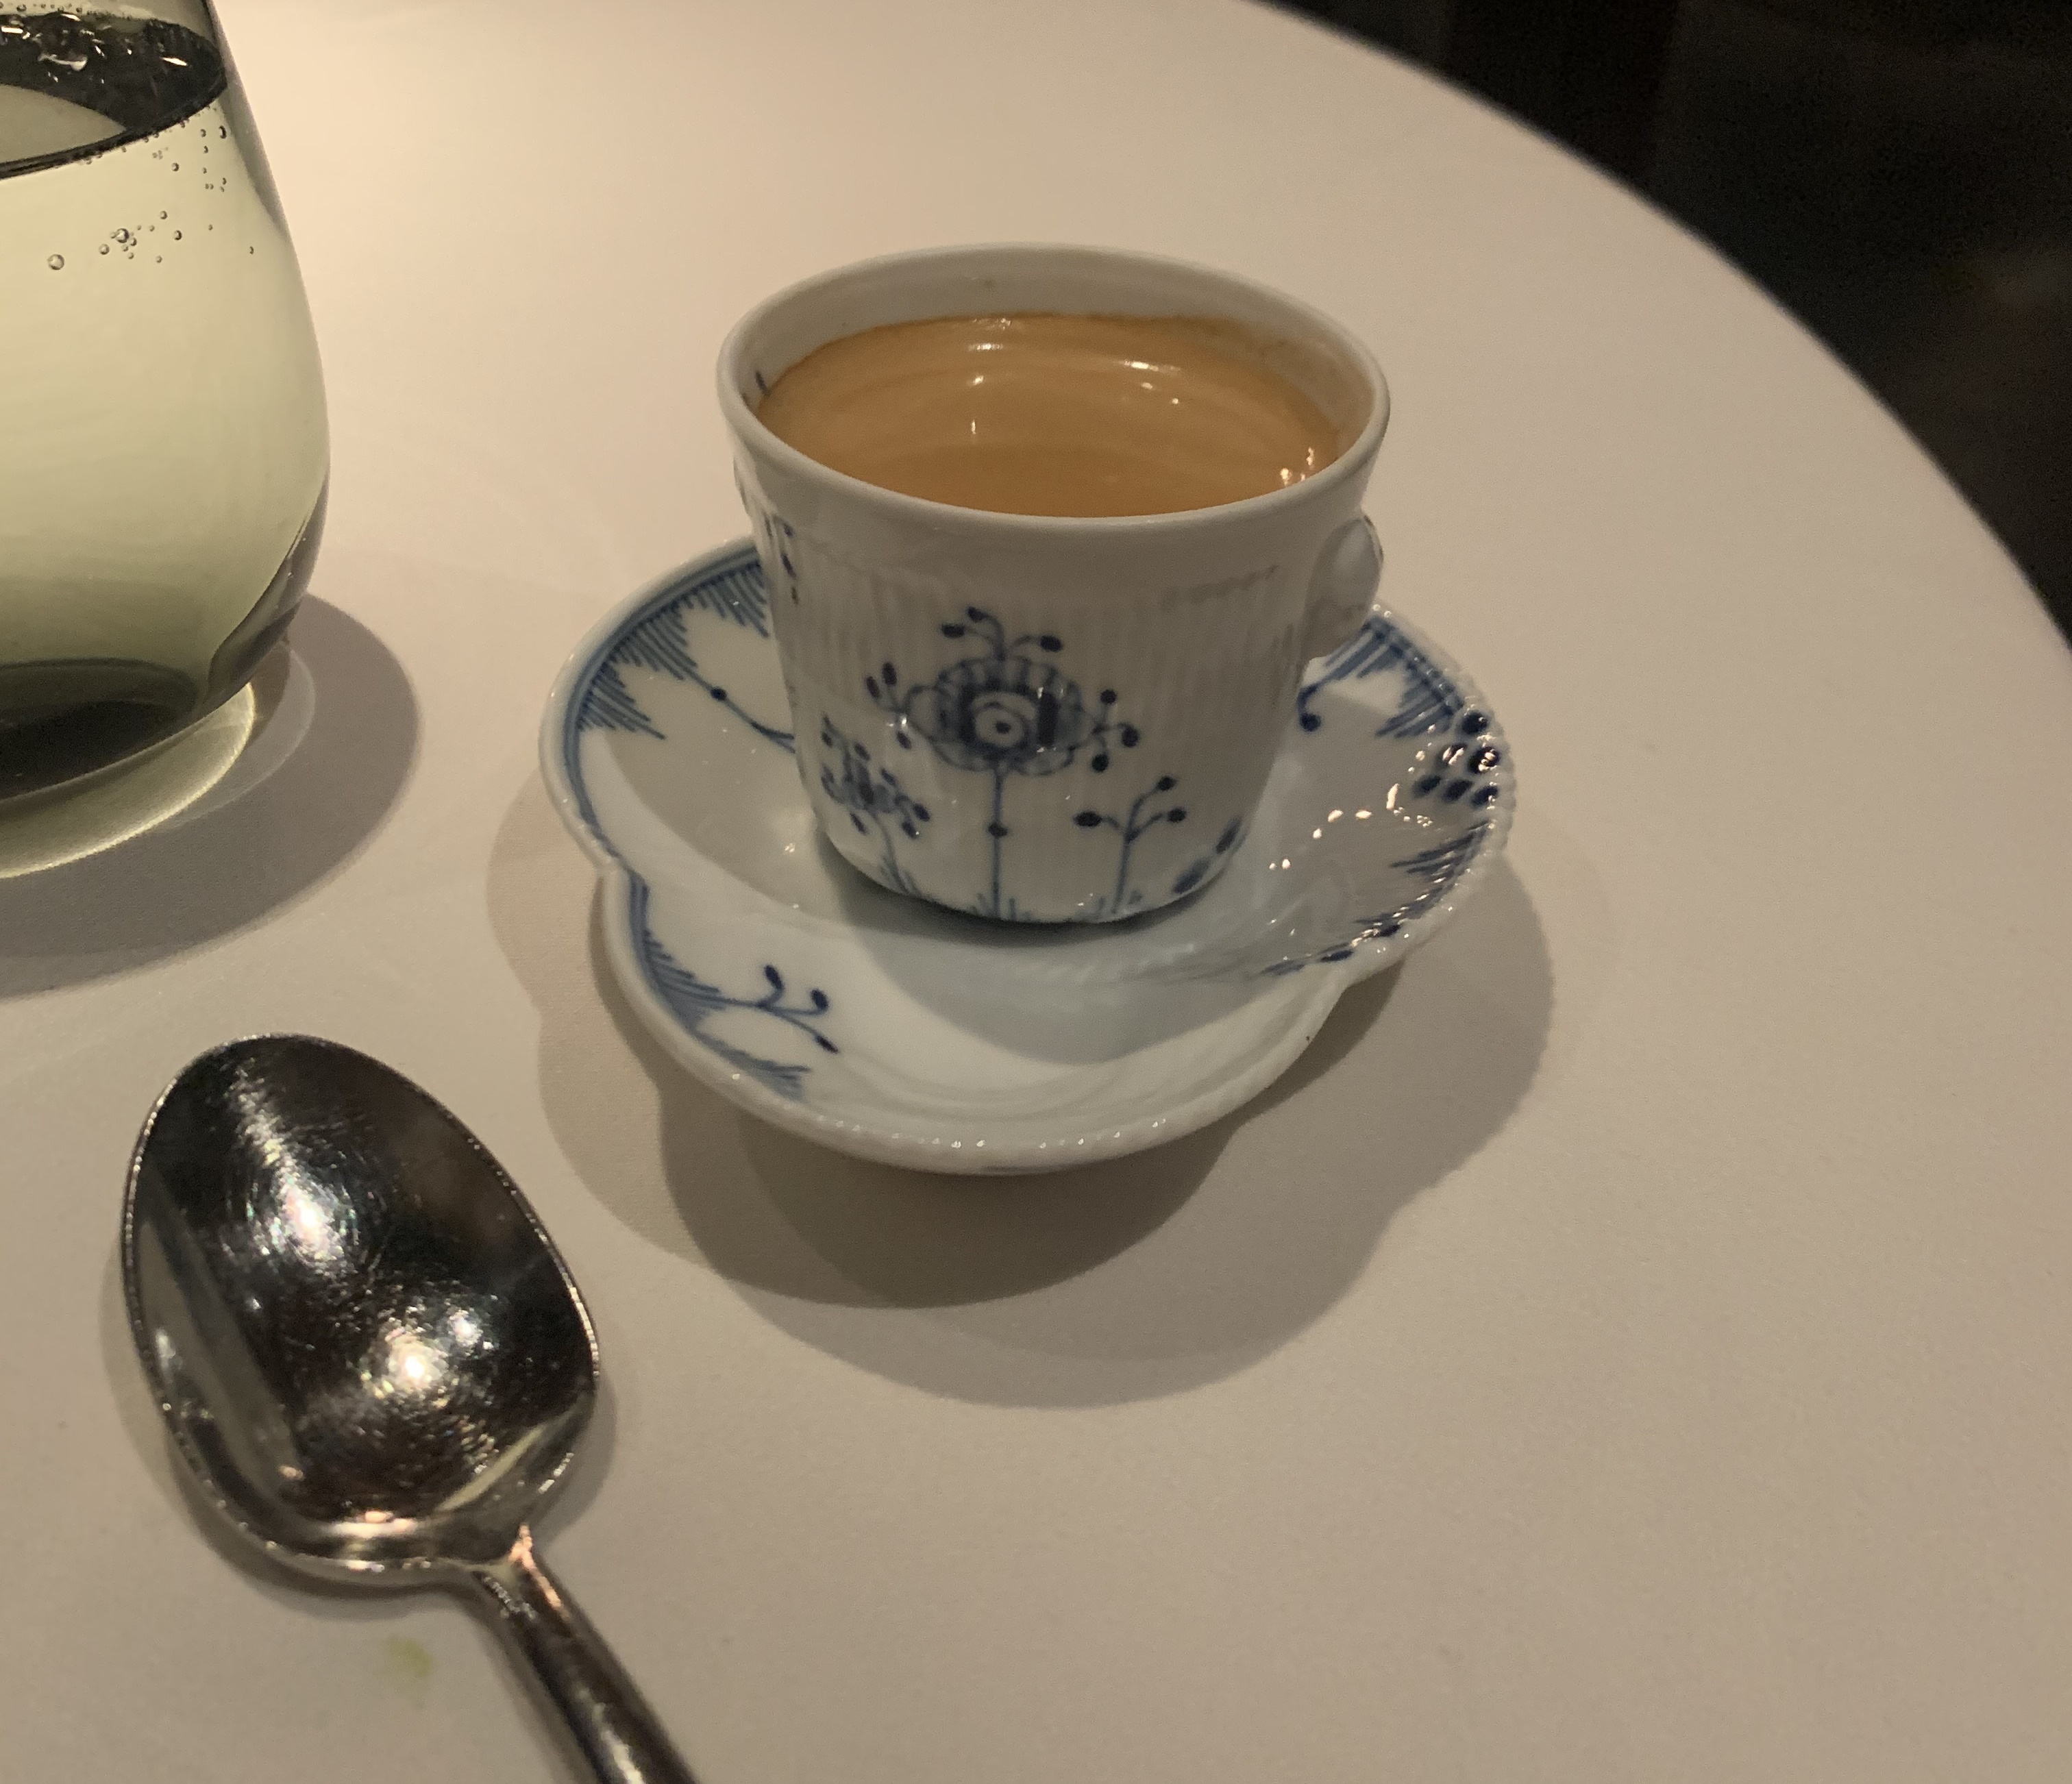 Espresso with a light head in a tiny porcelain cup, accented with abstract blue designs that look vaguely like trees. It's on an oddly-shaped saucer with the same blue designs.